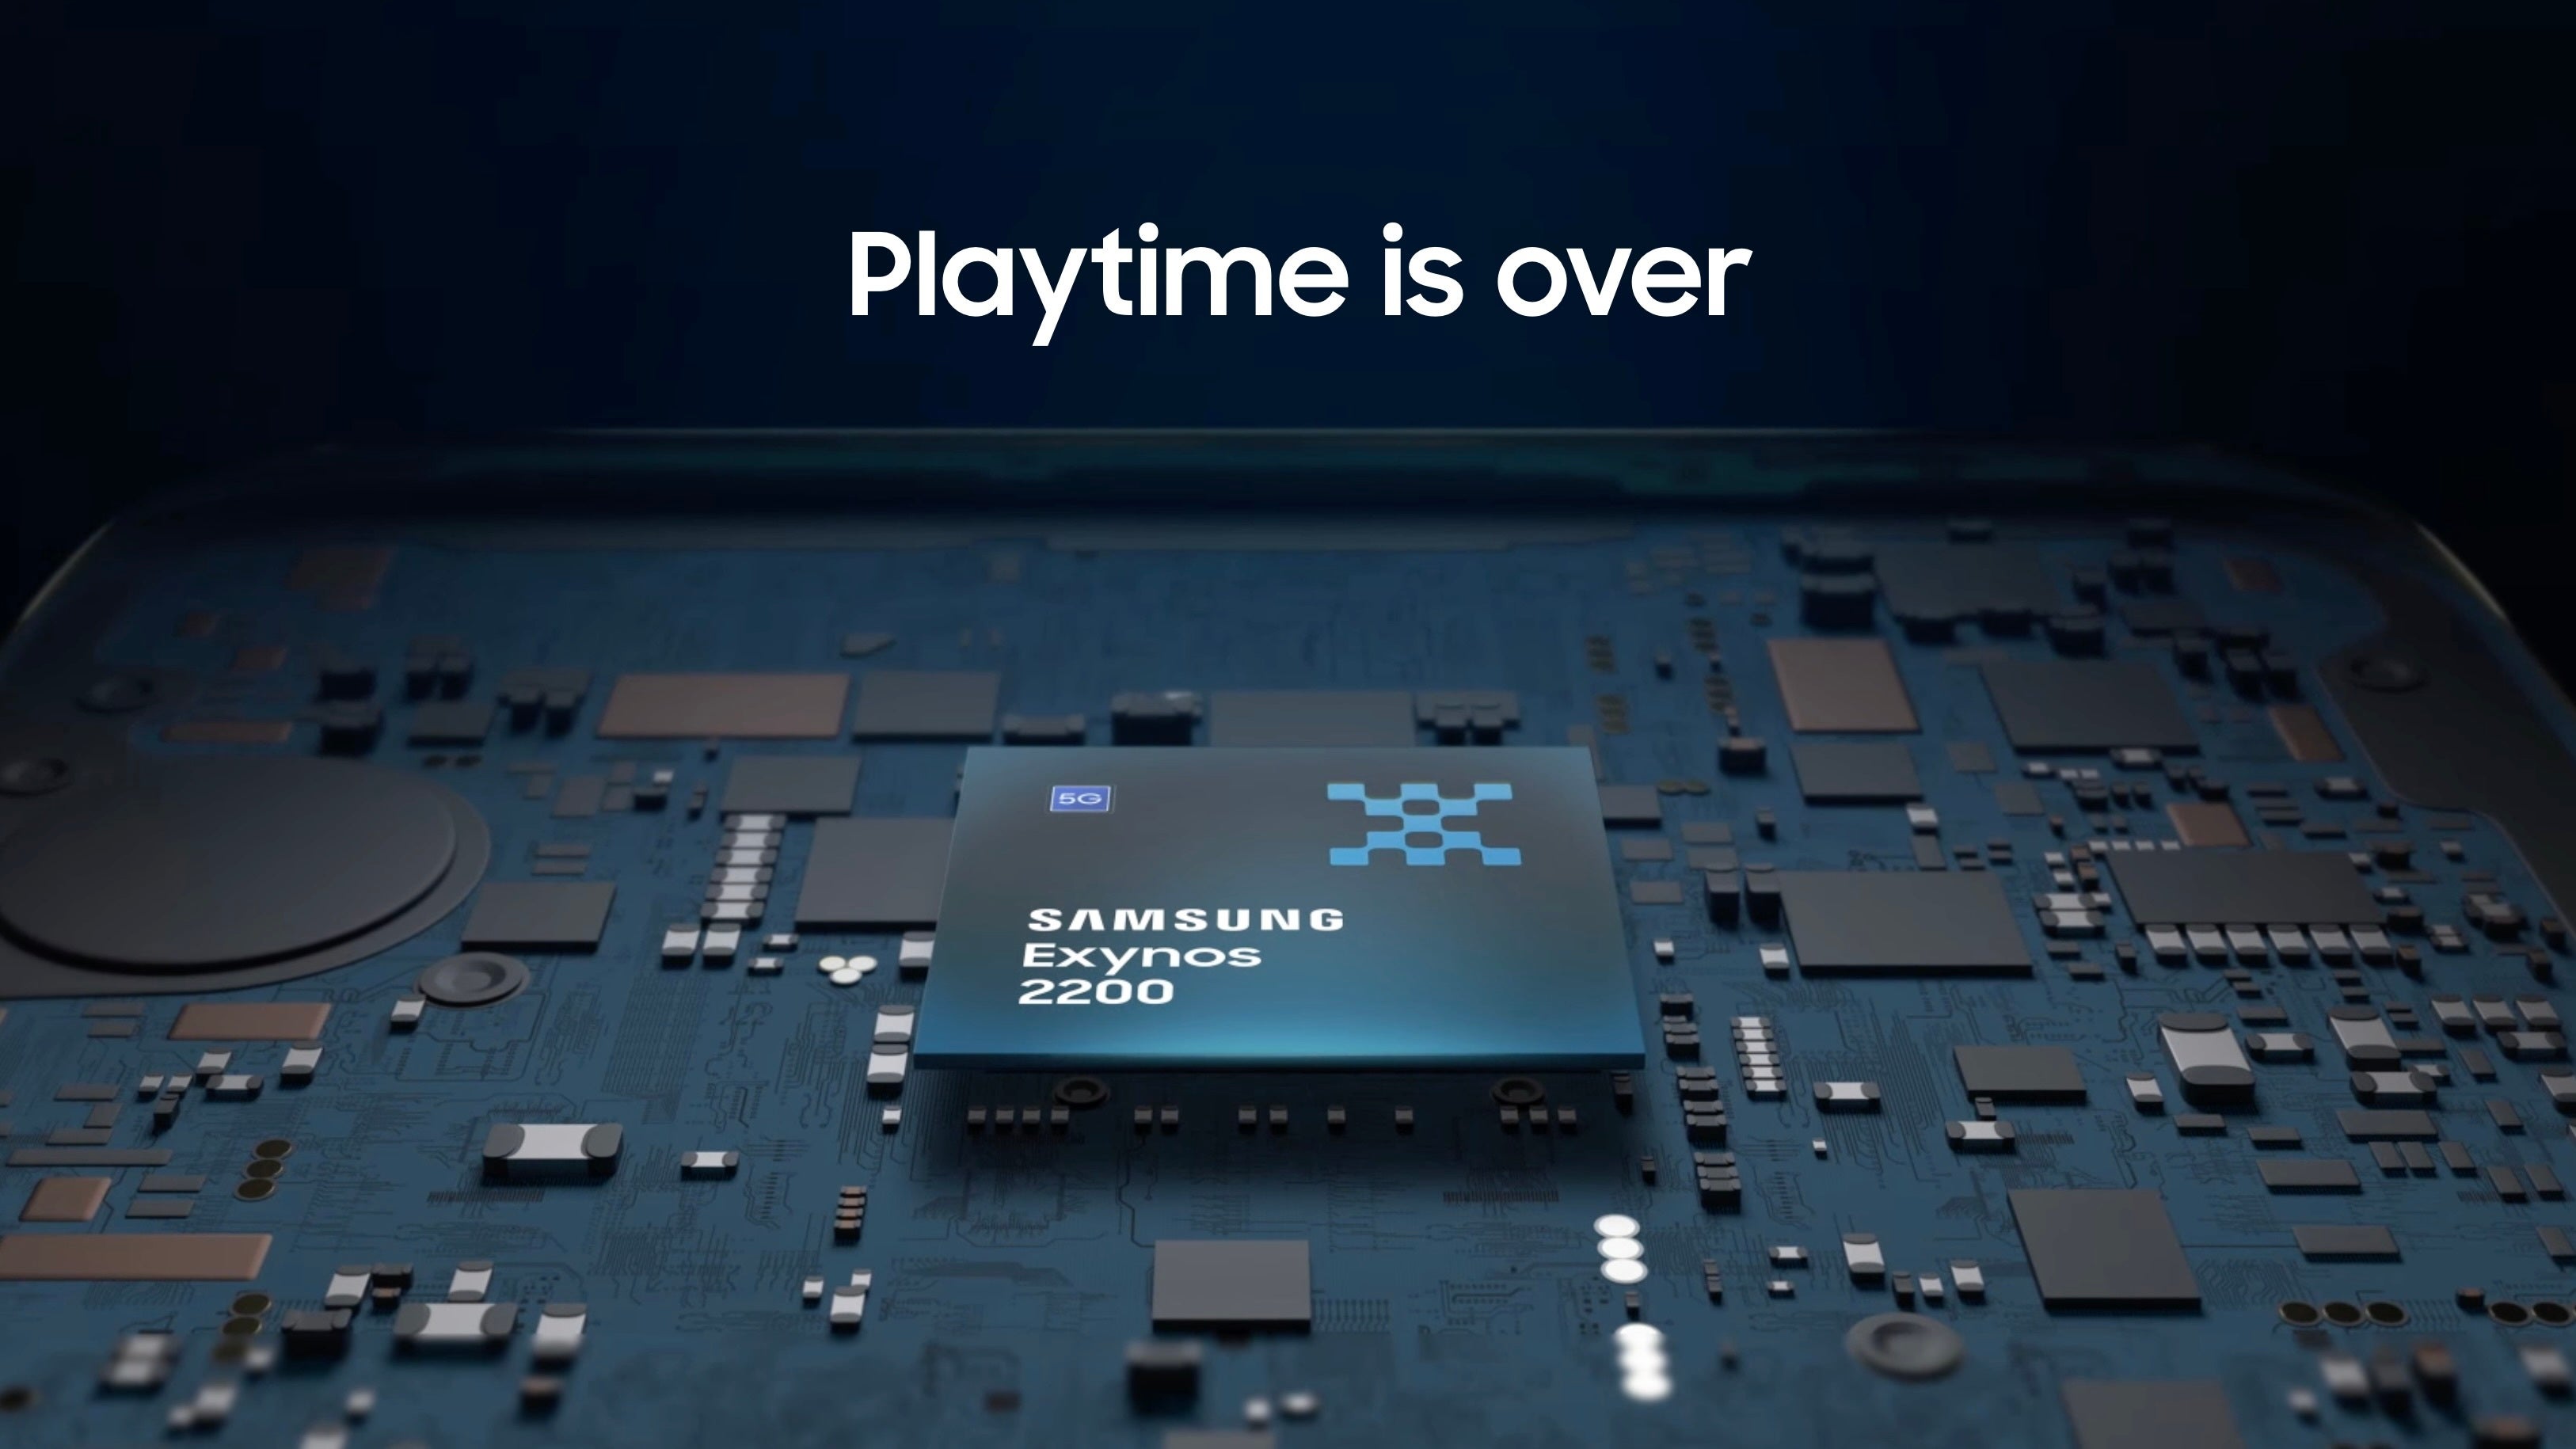 Exynos' playtime is indeed over - The Galaxy S23: Why Samsung could have pulled an Apple with its pricing strategy